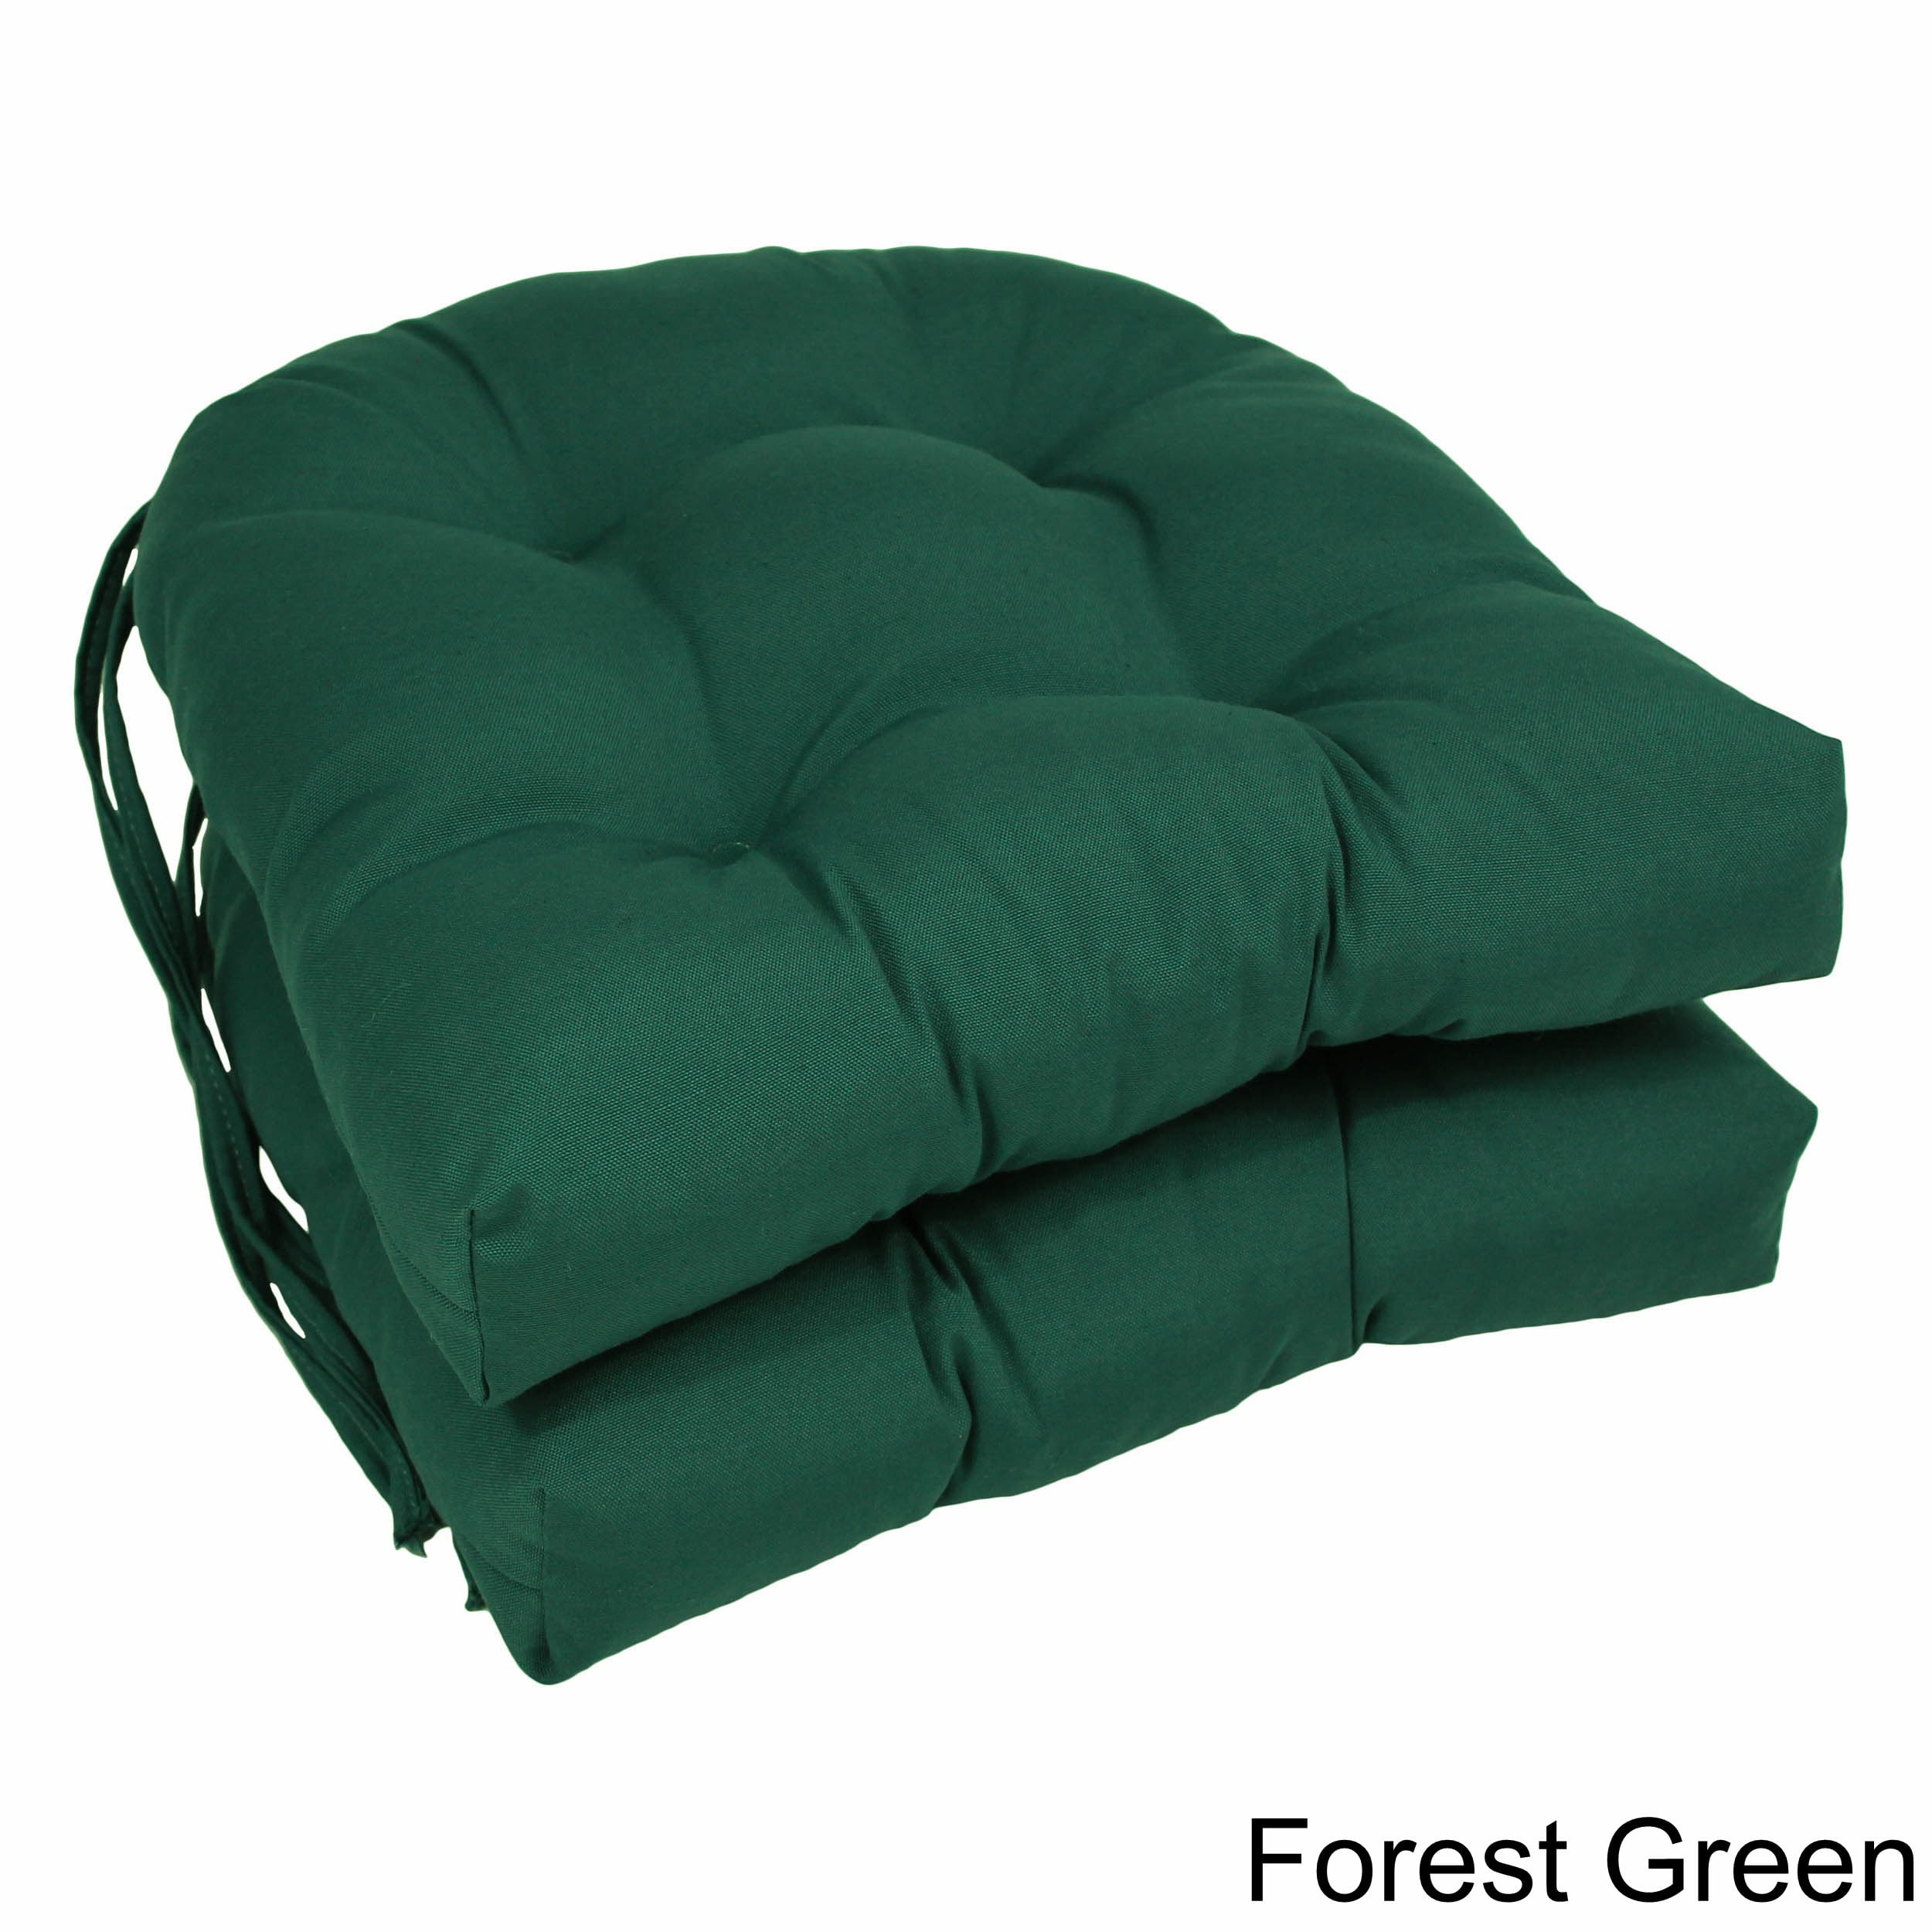 Blazing Needles 916X16US-T-6CH-MS-HG 16 in. Solid Microsuede U-Shaped Tufted Chair Cushions, Hunter Green - Set of 6